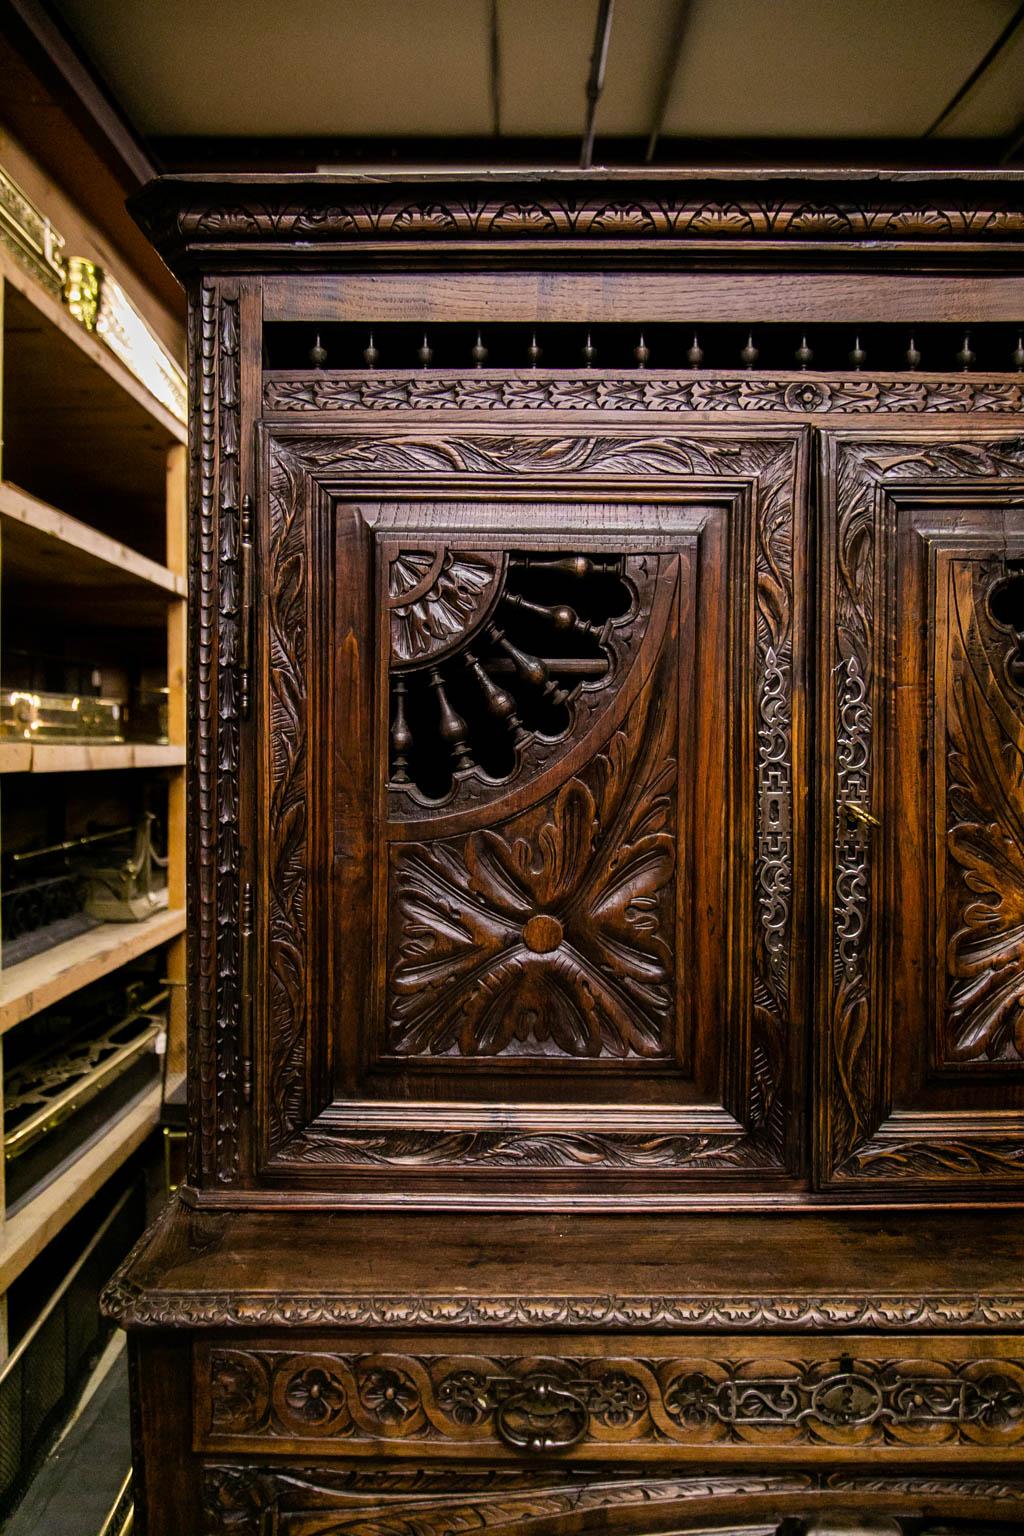 This cupboard is profusely carved overall with stylized leaves and repeating stylized ribbons. It retains its original large intricate steel fretwork escutcheons. The upper doors are carved with open quarter wheel balustrades. The large steel hinges